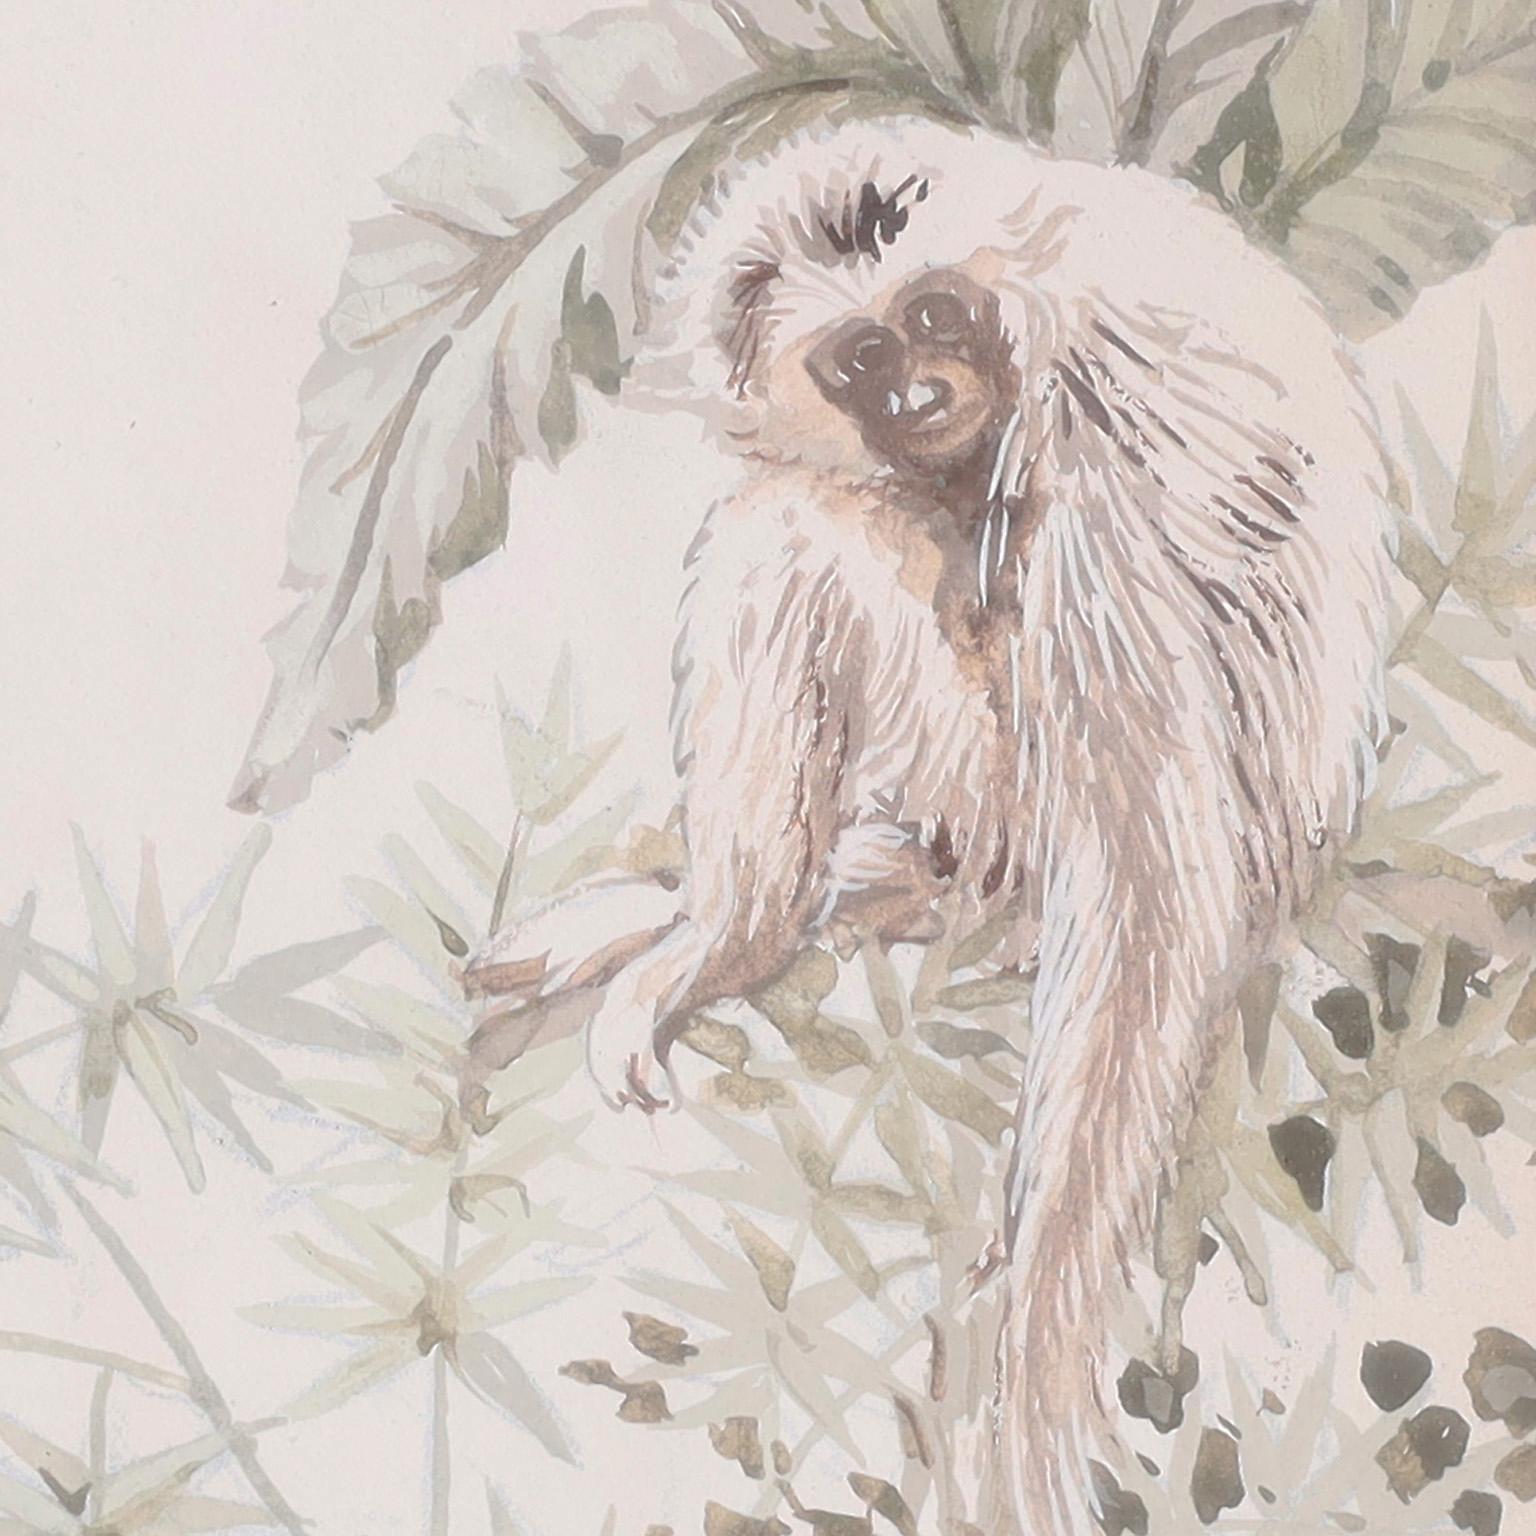 20th Century Pair of Watercolors on Paper with Birds and Monkeys by Harley Henoch